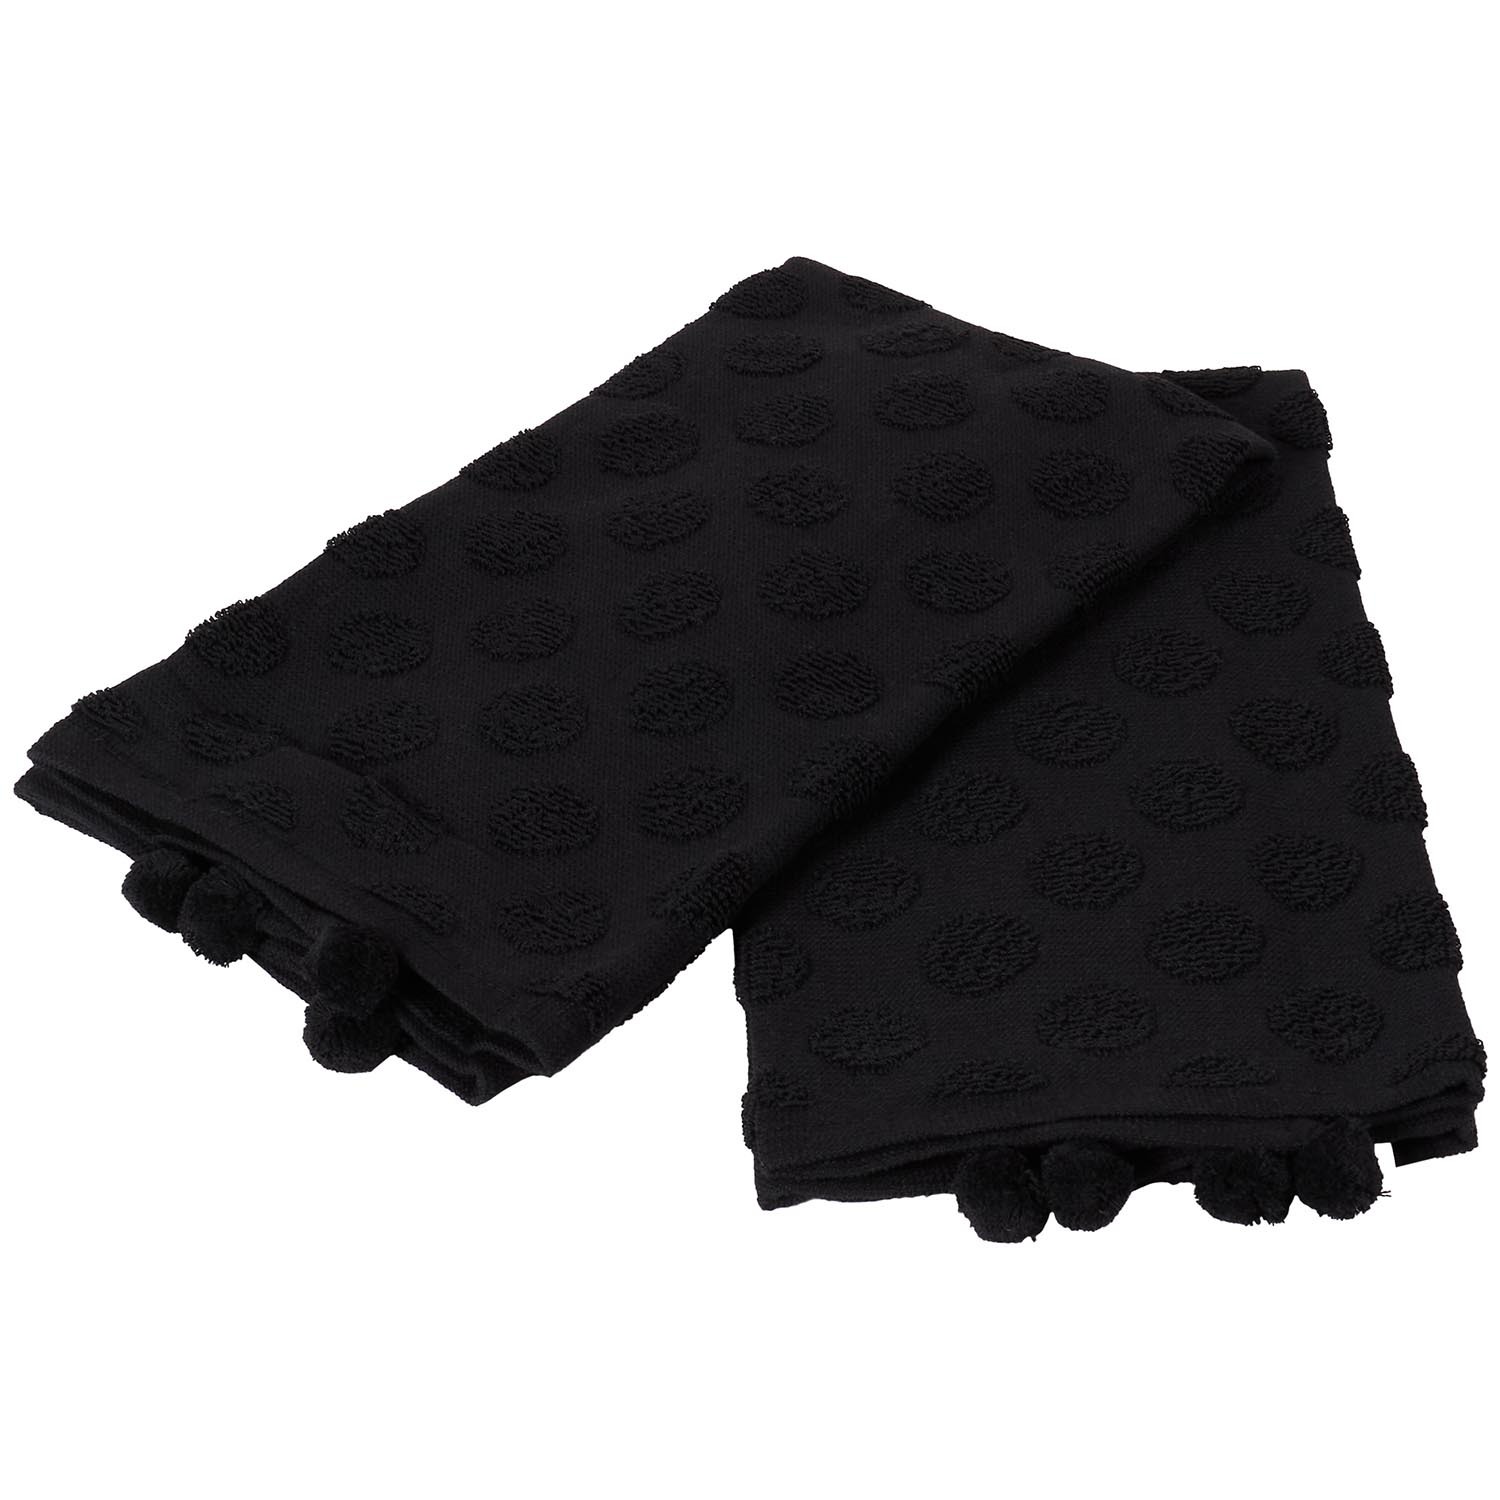 Pack of 2 Dobby Terry Kitchen Towels with Pom Poms - Black Image 8